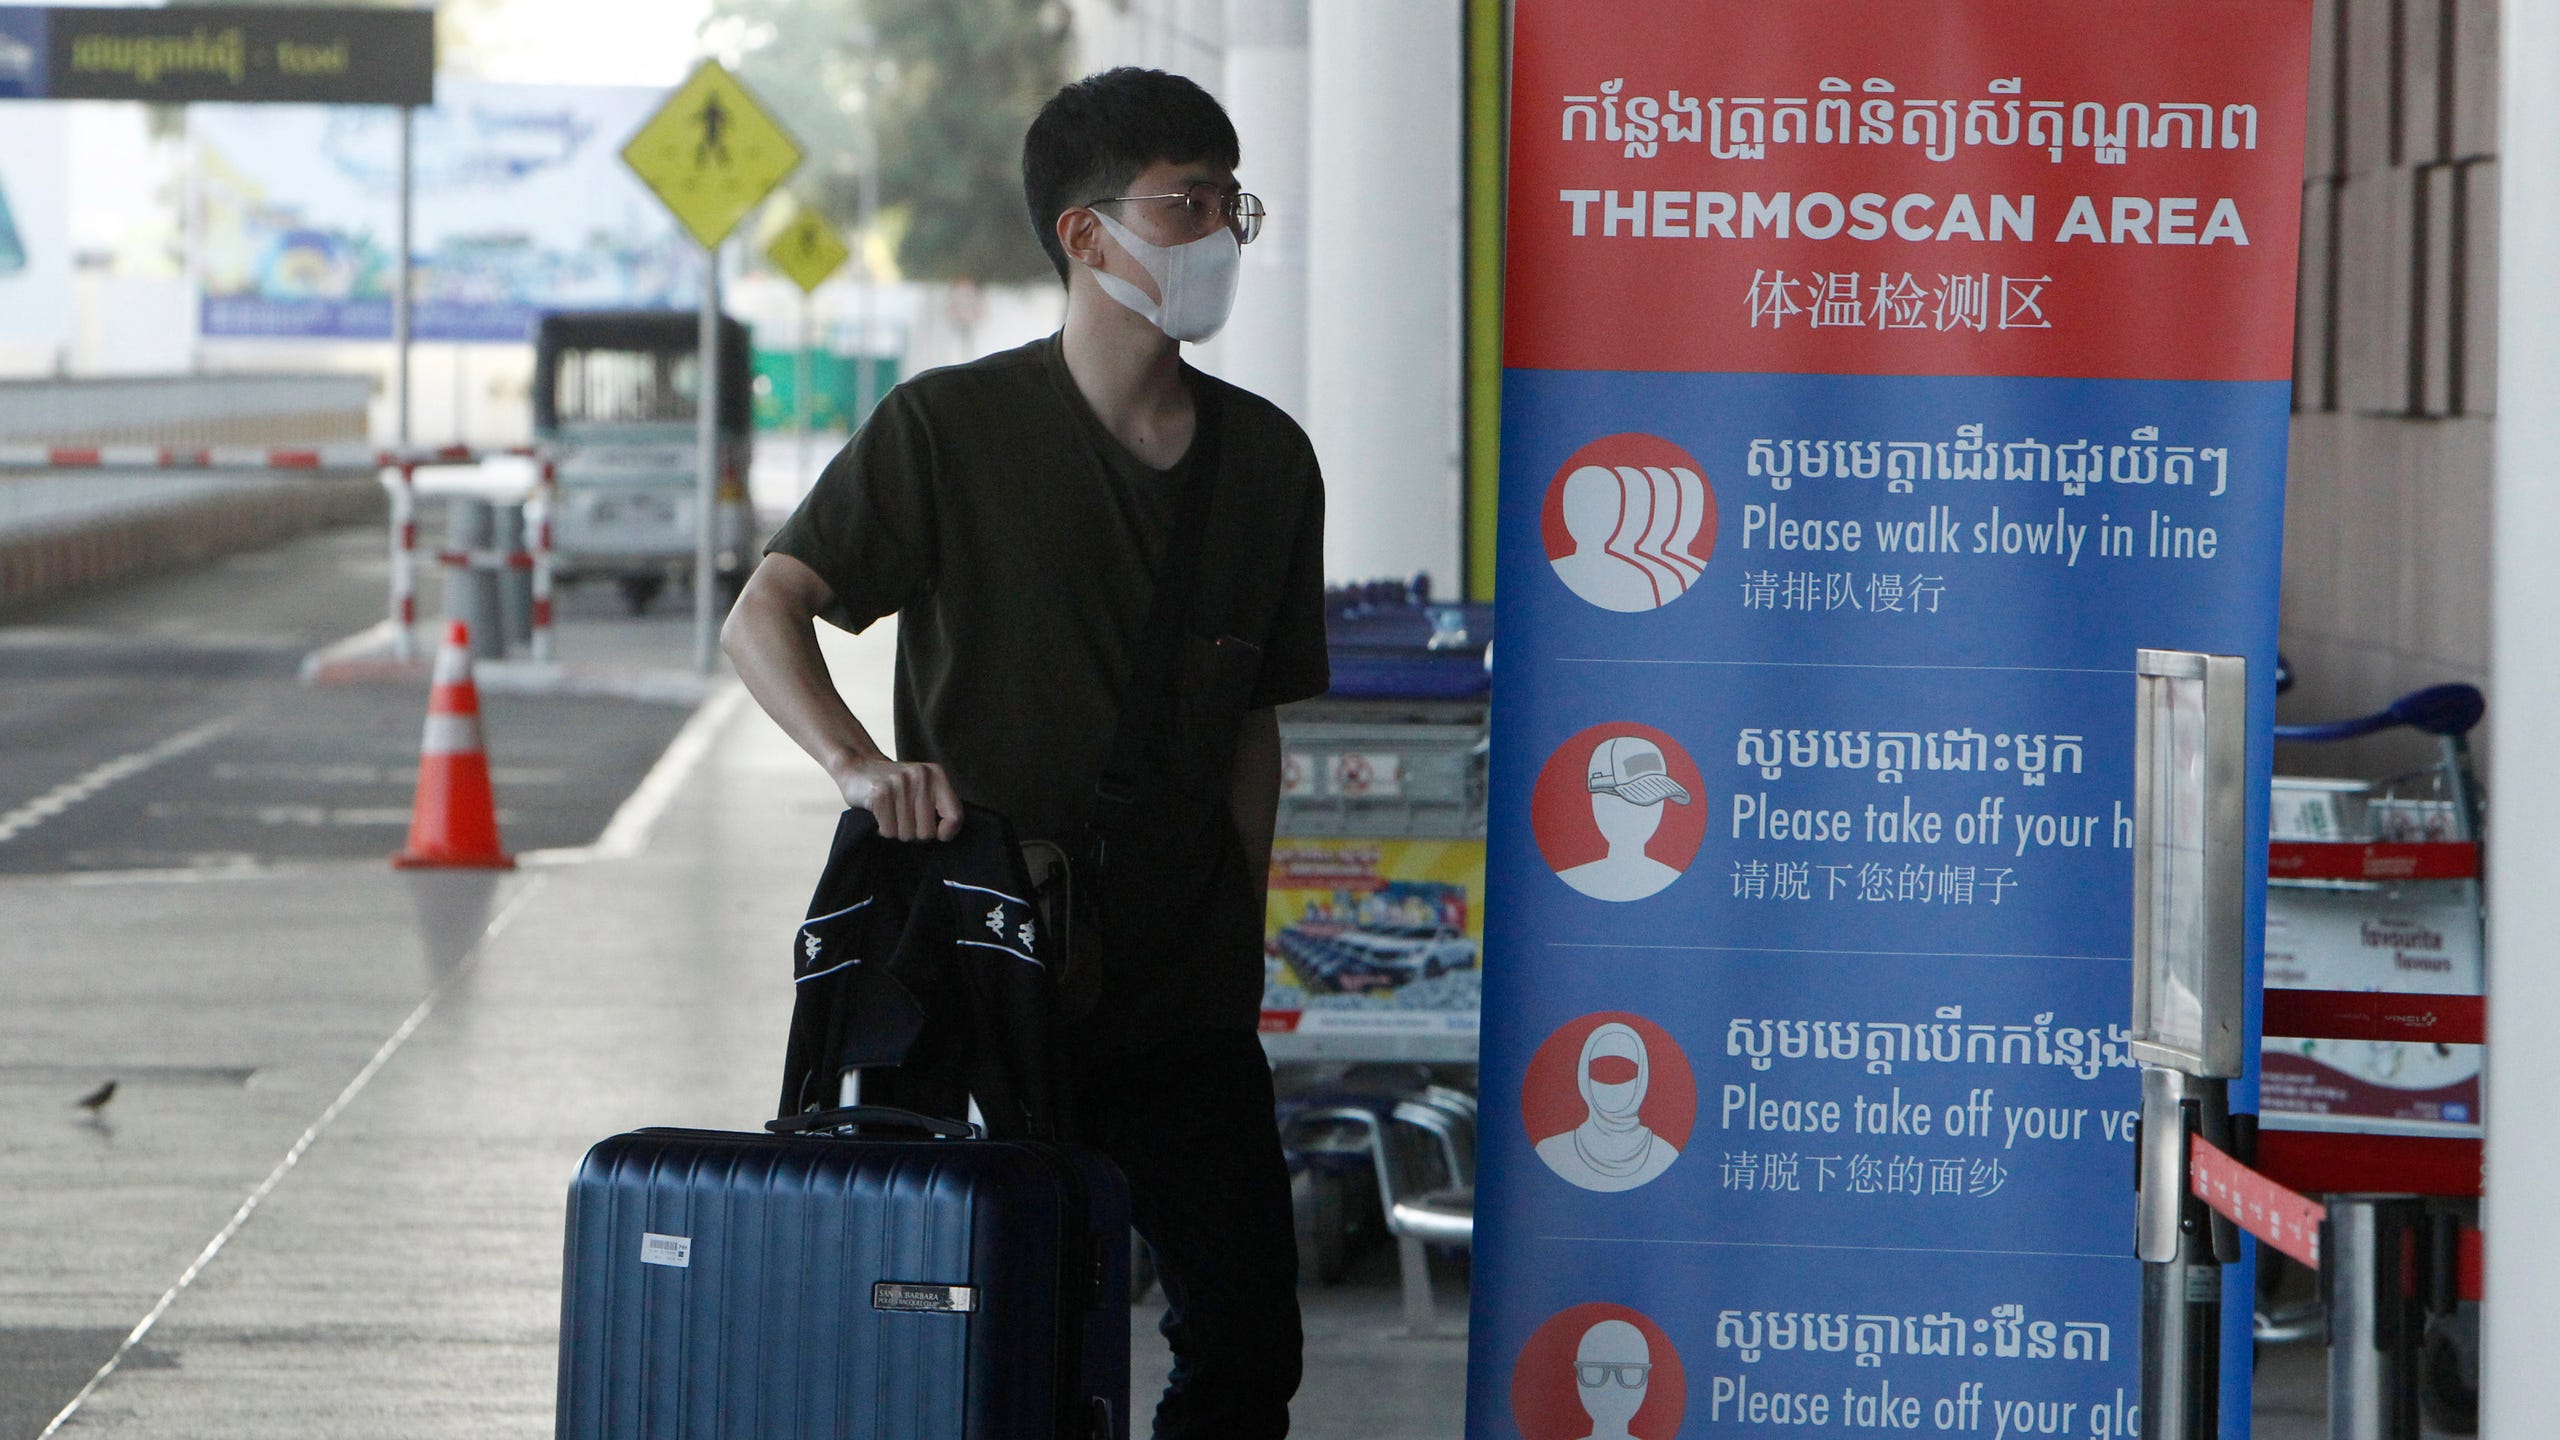 A tourist wearing a face mask enters an area of thermo scan at Phnom Penh International Airport in this file photo from April 3, 2020.